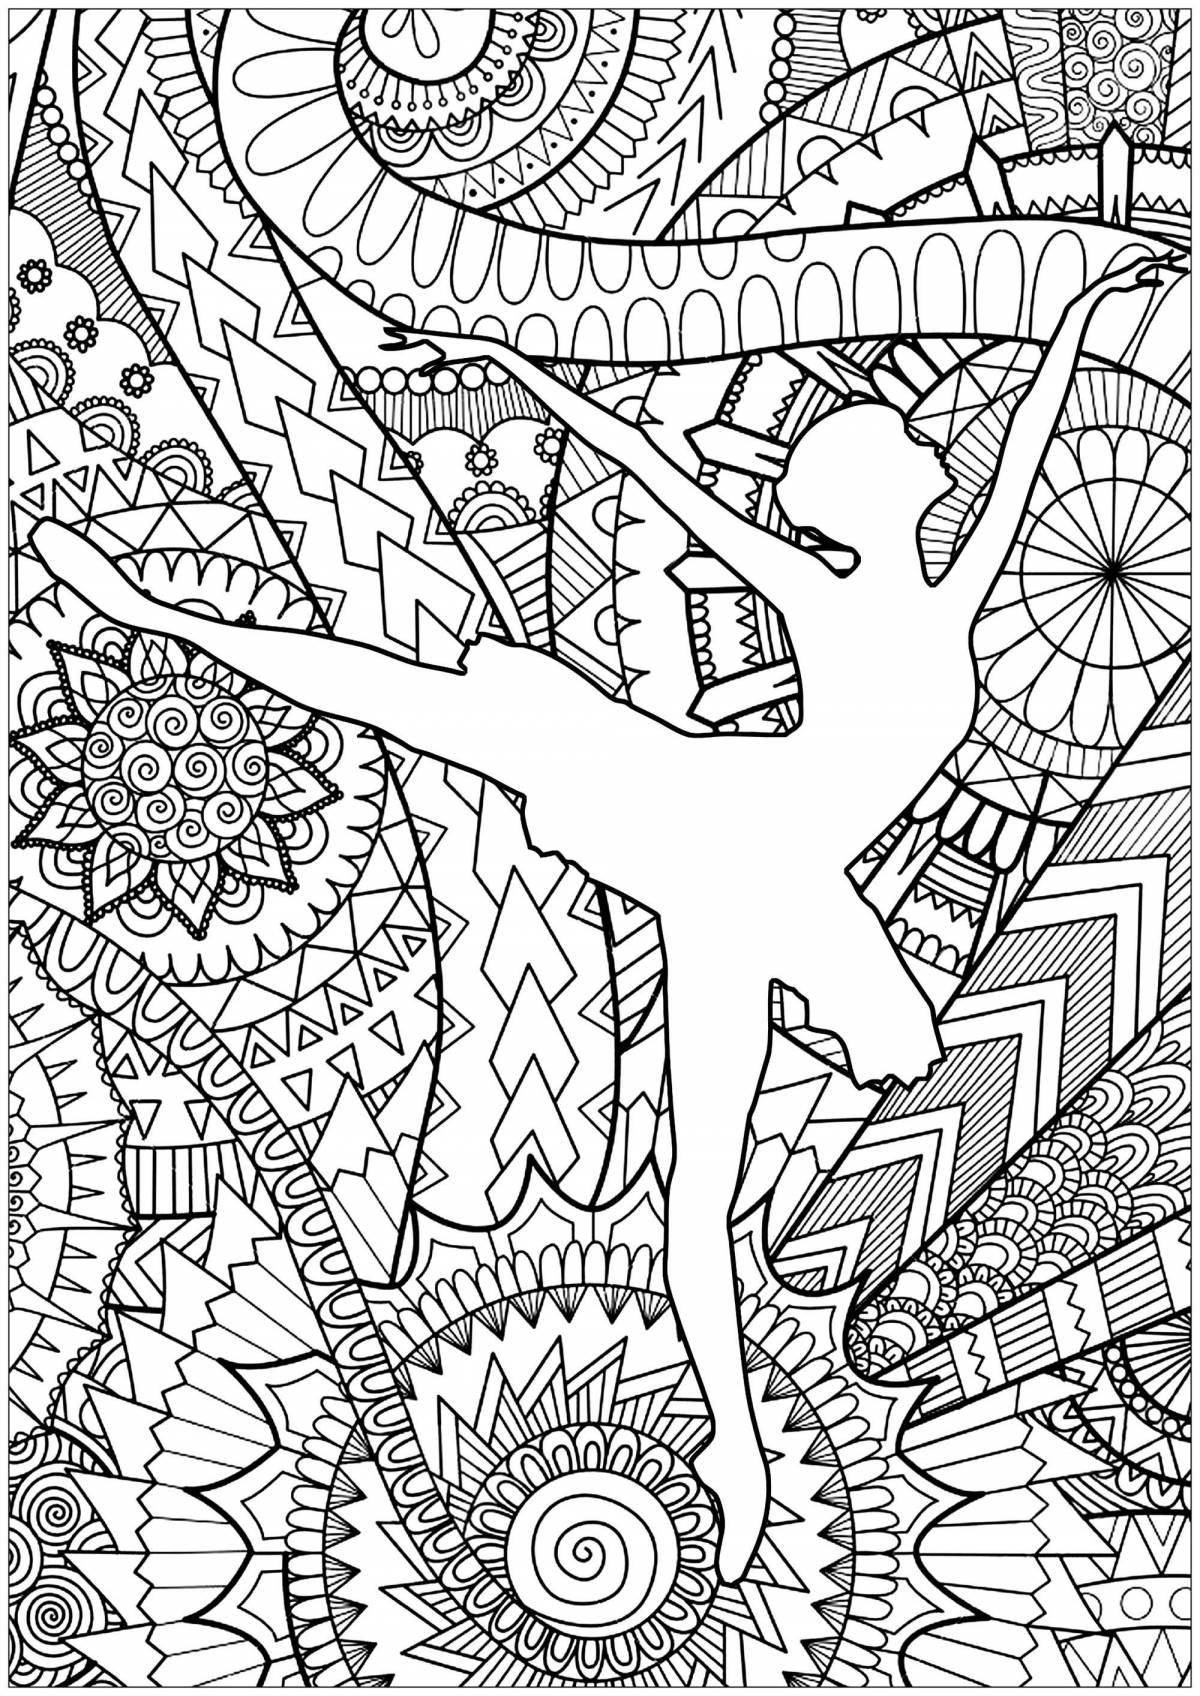 Travel live coloring page